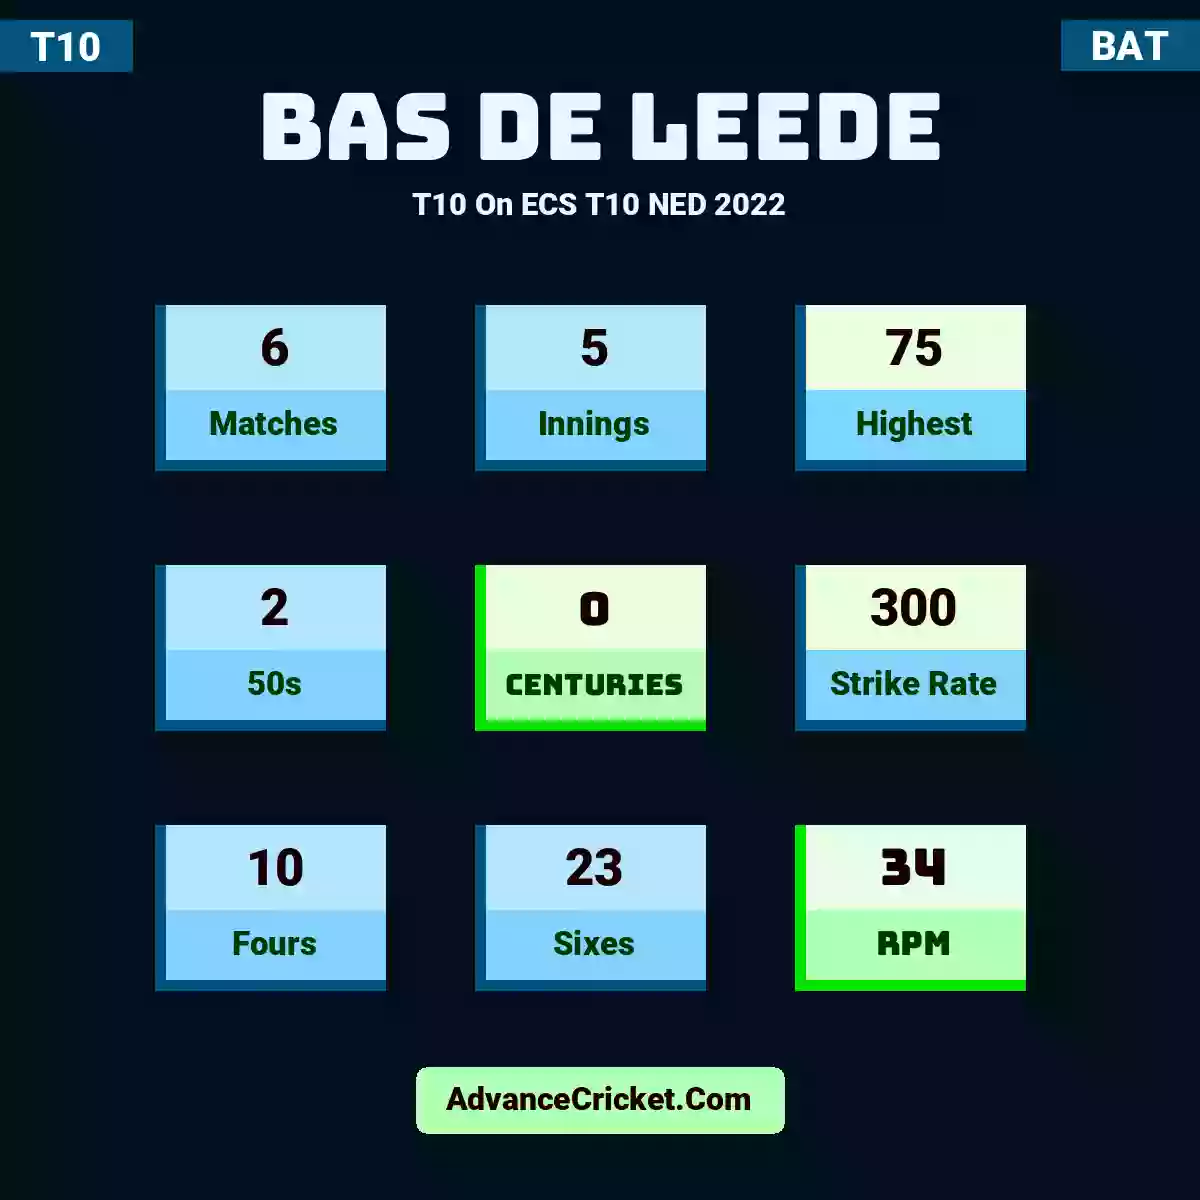 Bas de Leede T10  On ECS T10 NED 2022, Bas de Leede played 6 matches, scored 75 runs as highest, 2 half-centuries, and 0 centuries, with a strike rate of 300. B.Leede hit 10 fours and 23 sixes, with an RPM of 34.